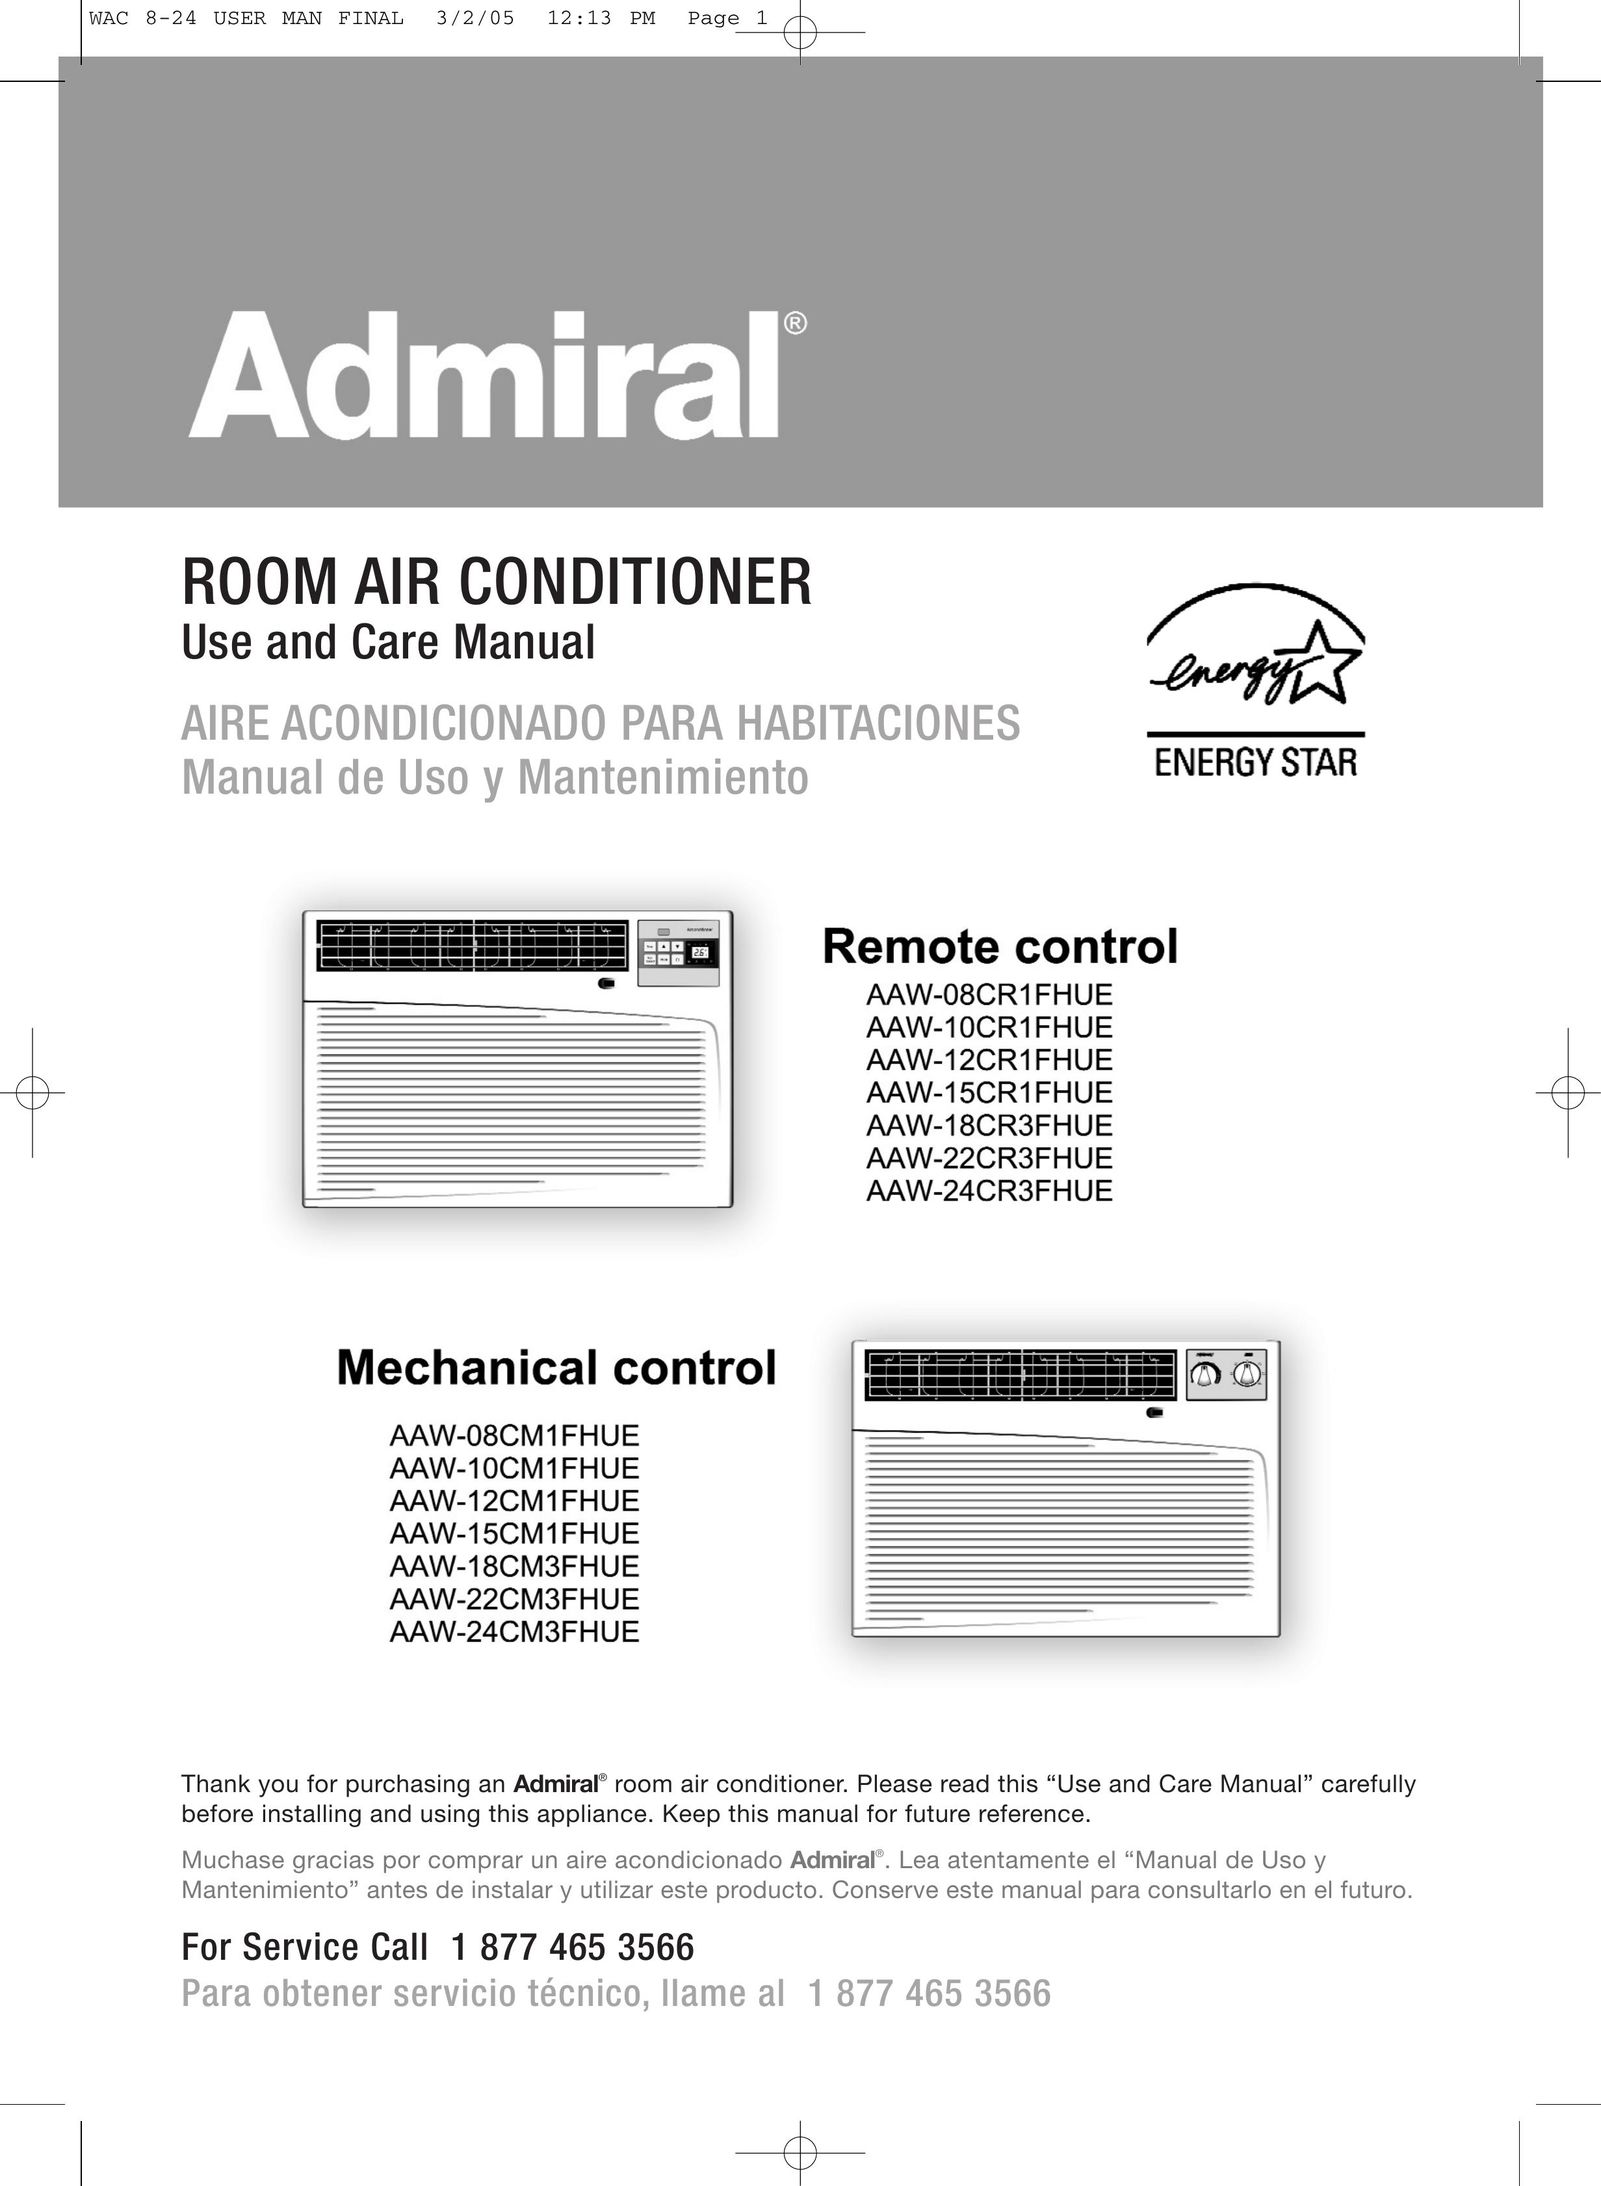 Admiral AAW-18CR1FHUE Air Conditioner User Manual